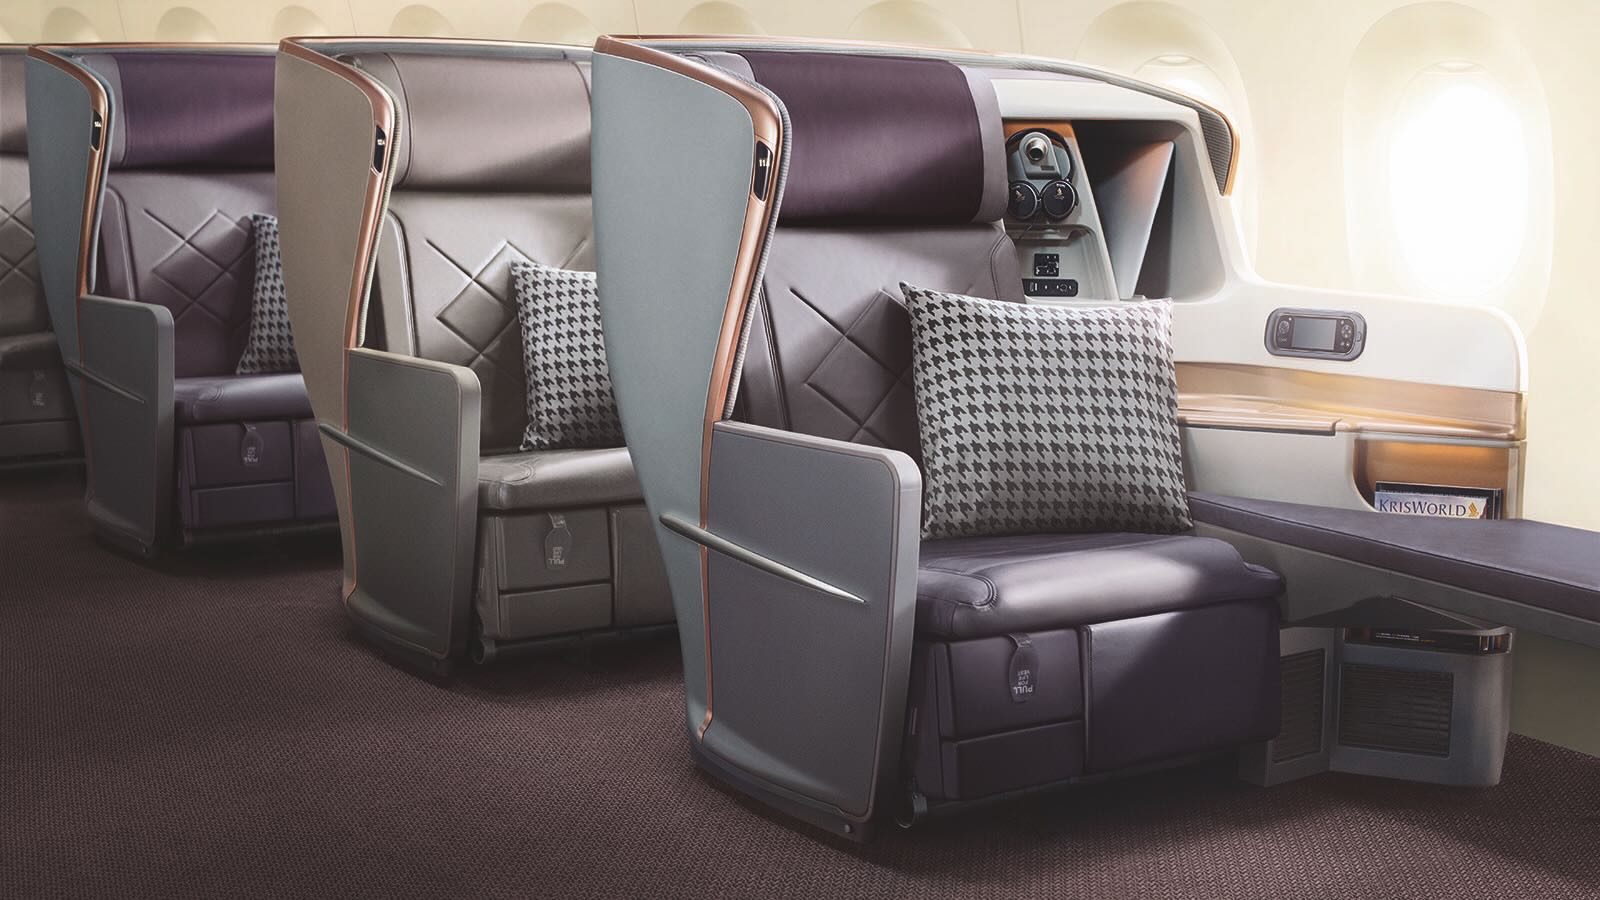 Singapore Airlines long haul Business Class